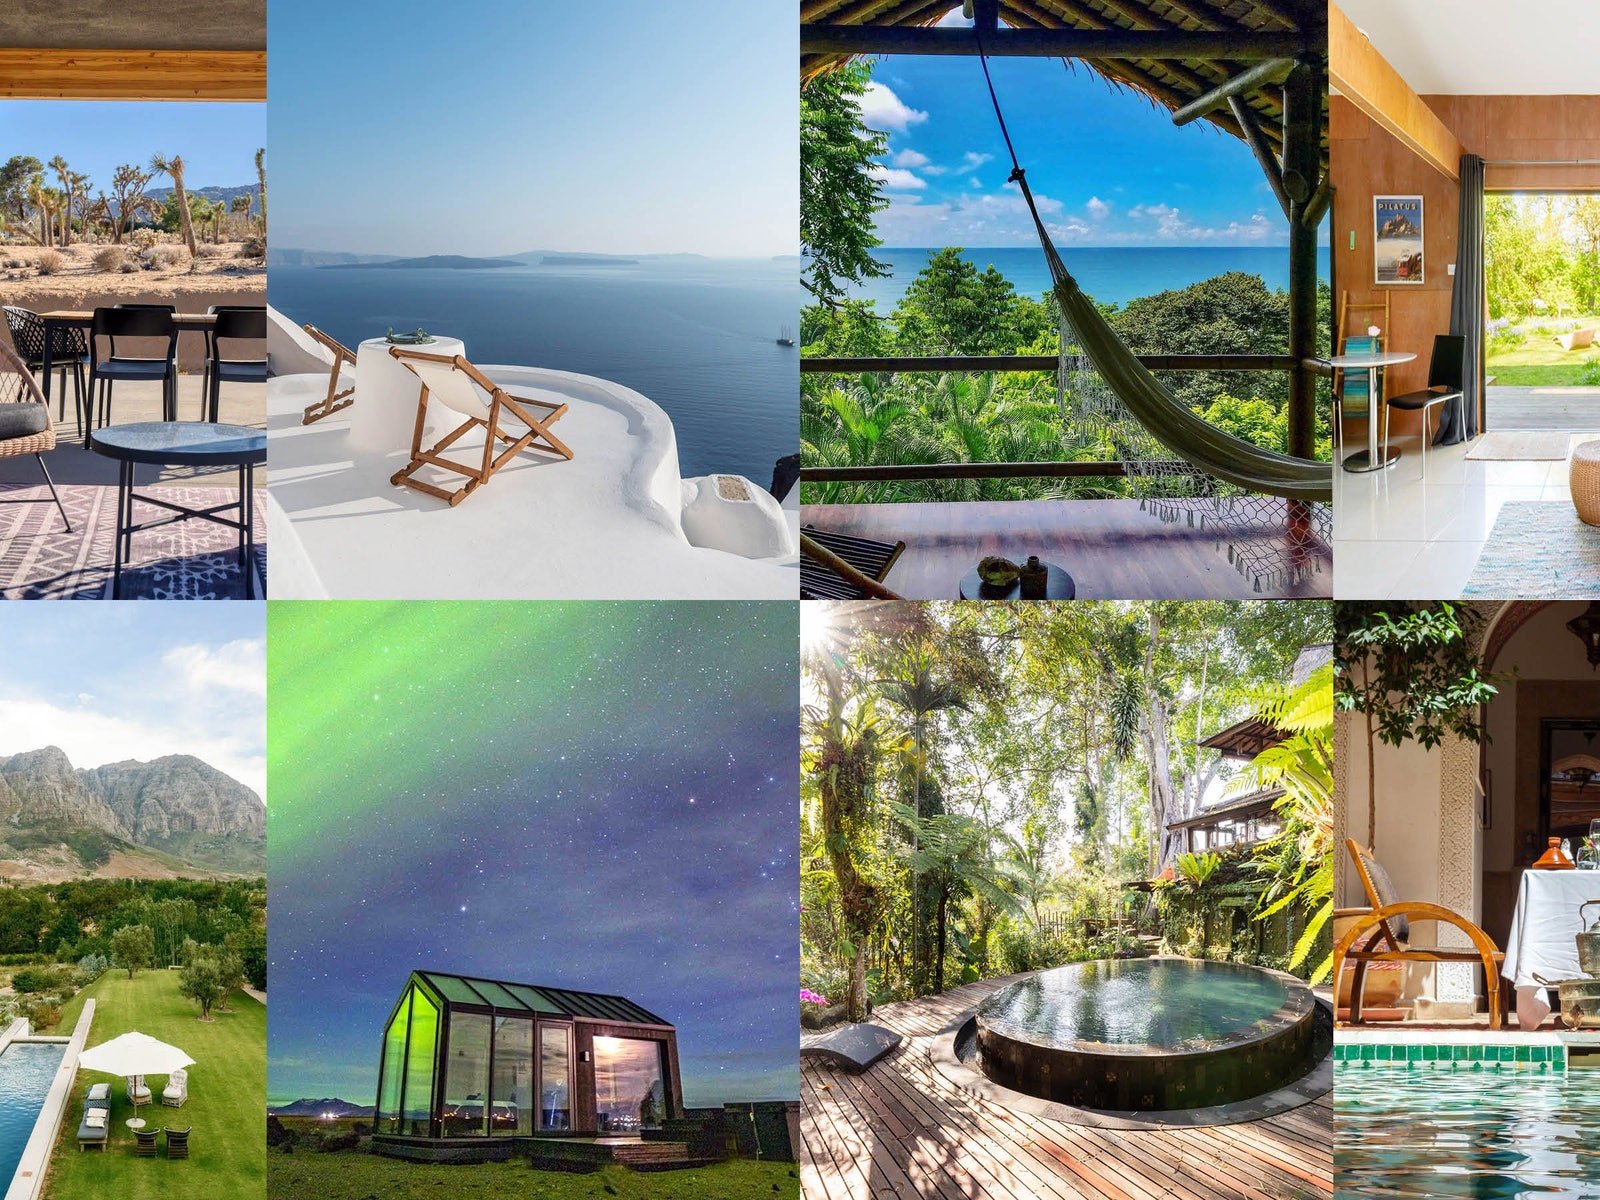 10 Most Favorited Airbnbs Around the World, From a Rainforest Villa in Bali to a Glass Cottage in Iceland